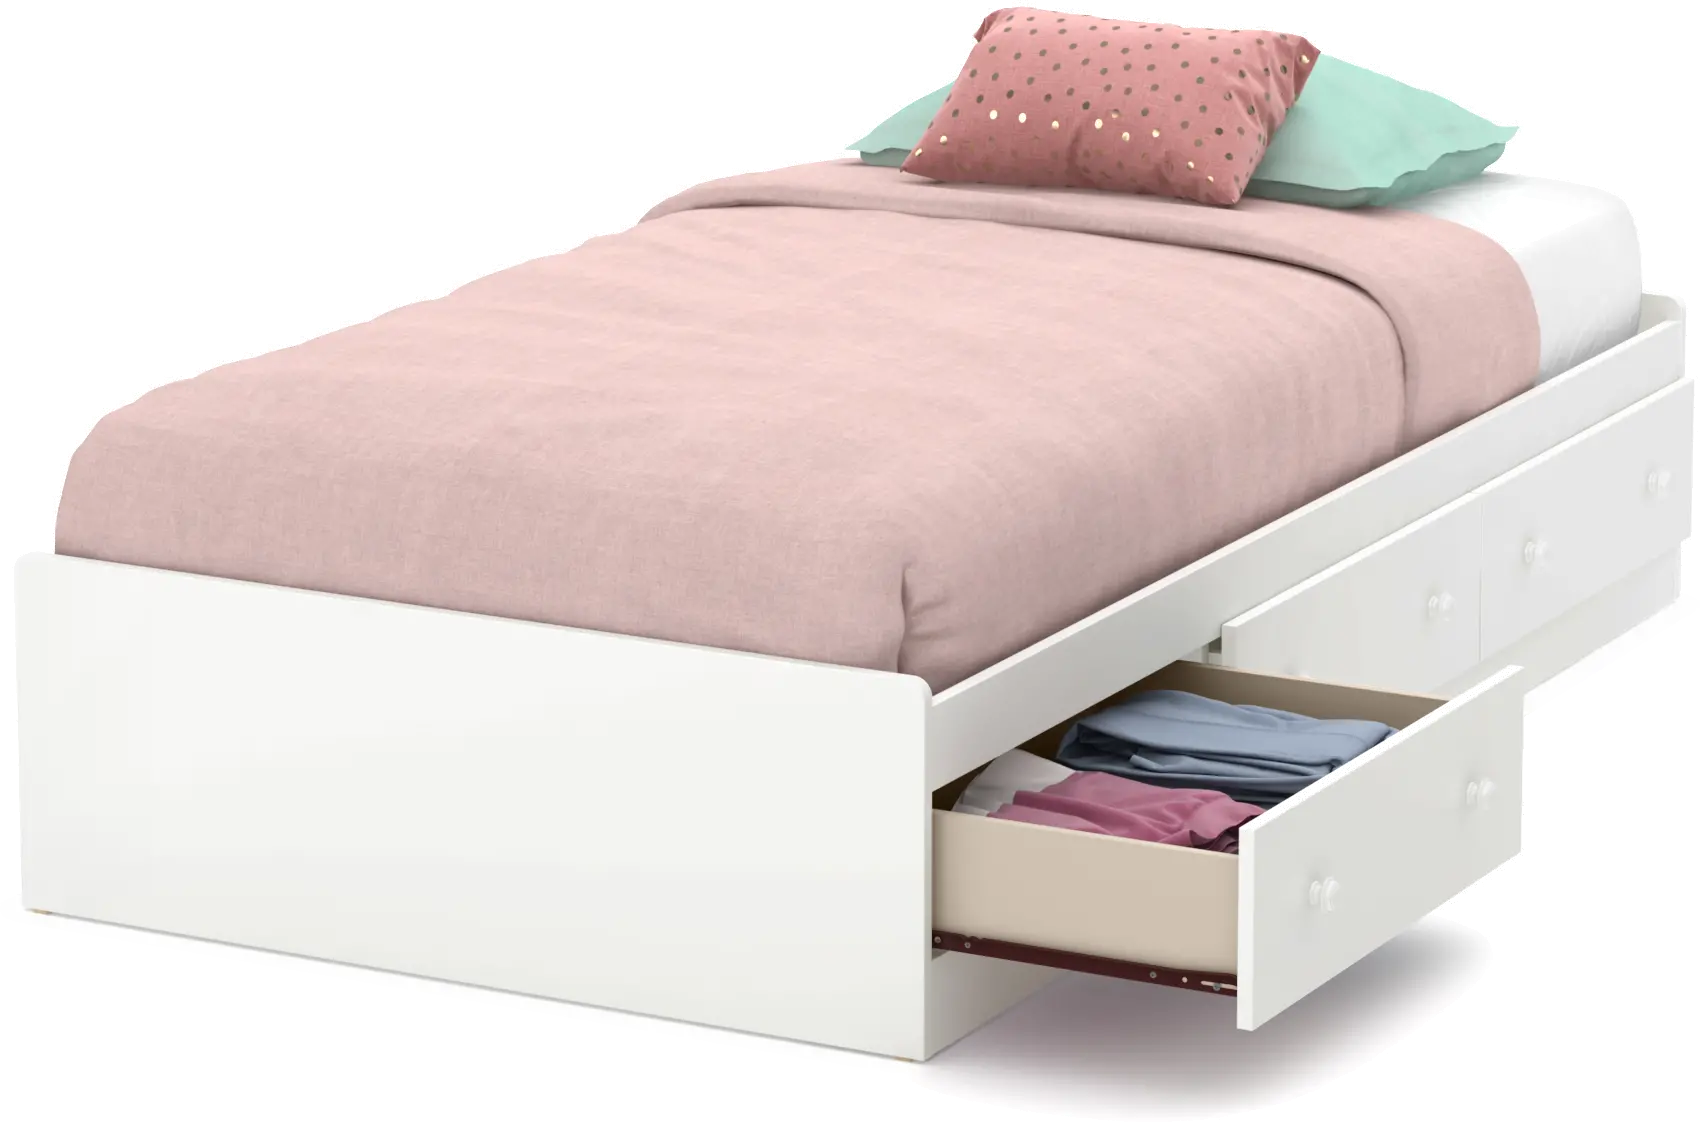 10479 Little Smileys White Twin Mates Bed - South Shore sku 10479